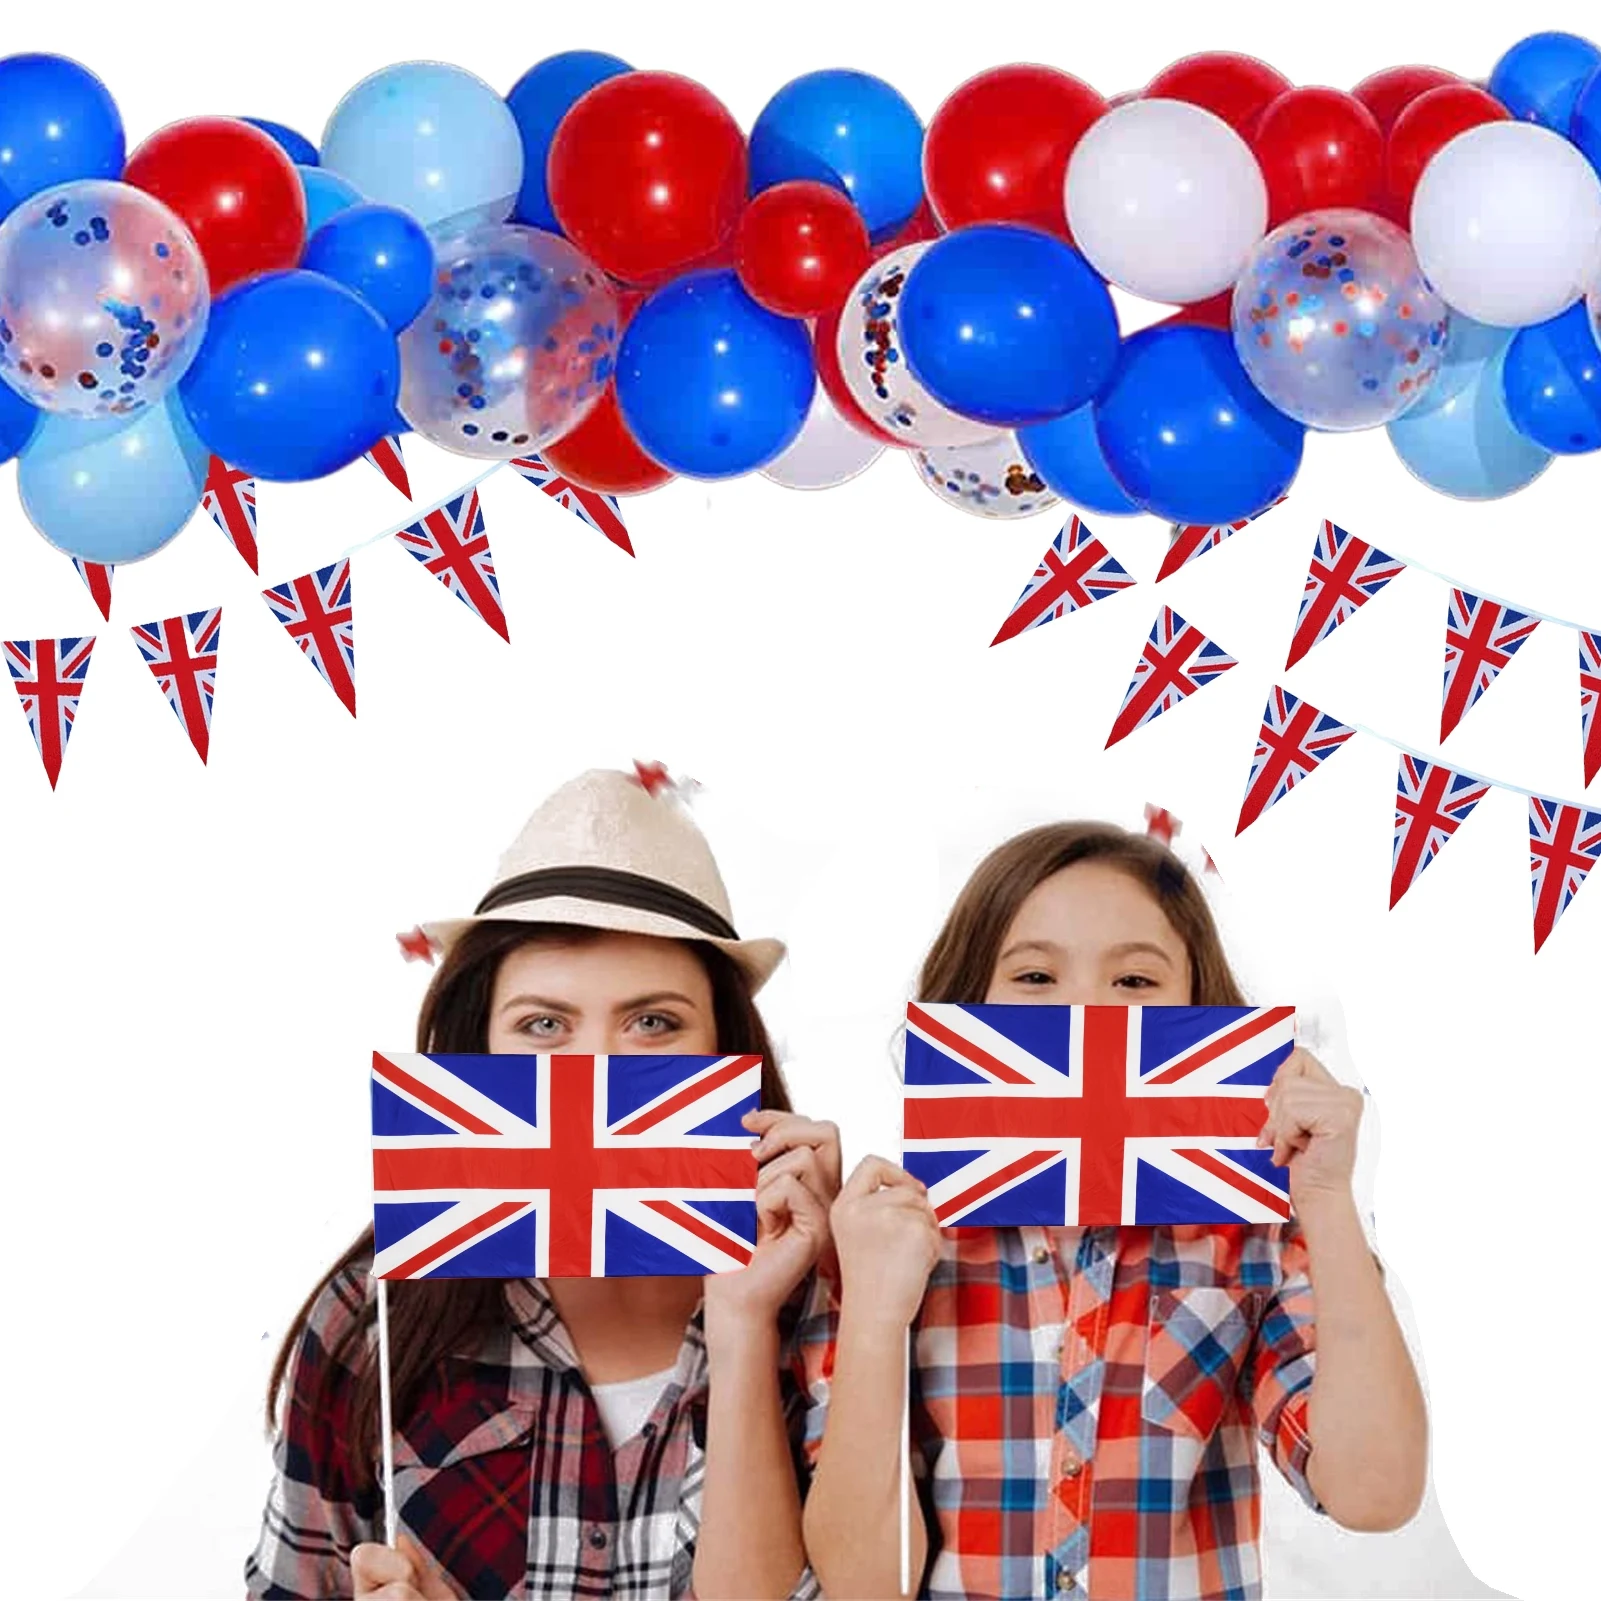 

Union Jack Themed Party Decorations VE Day Union Jack Party Supplies Union Jack Hand Waving Flag United Kingdom Banner For VE Da